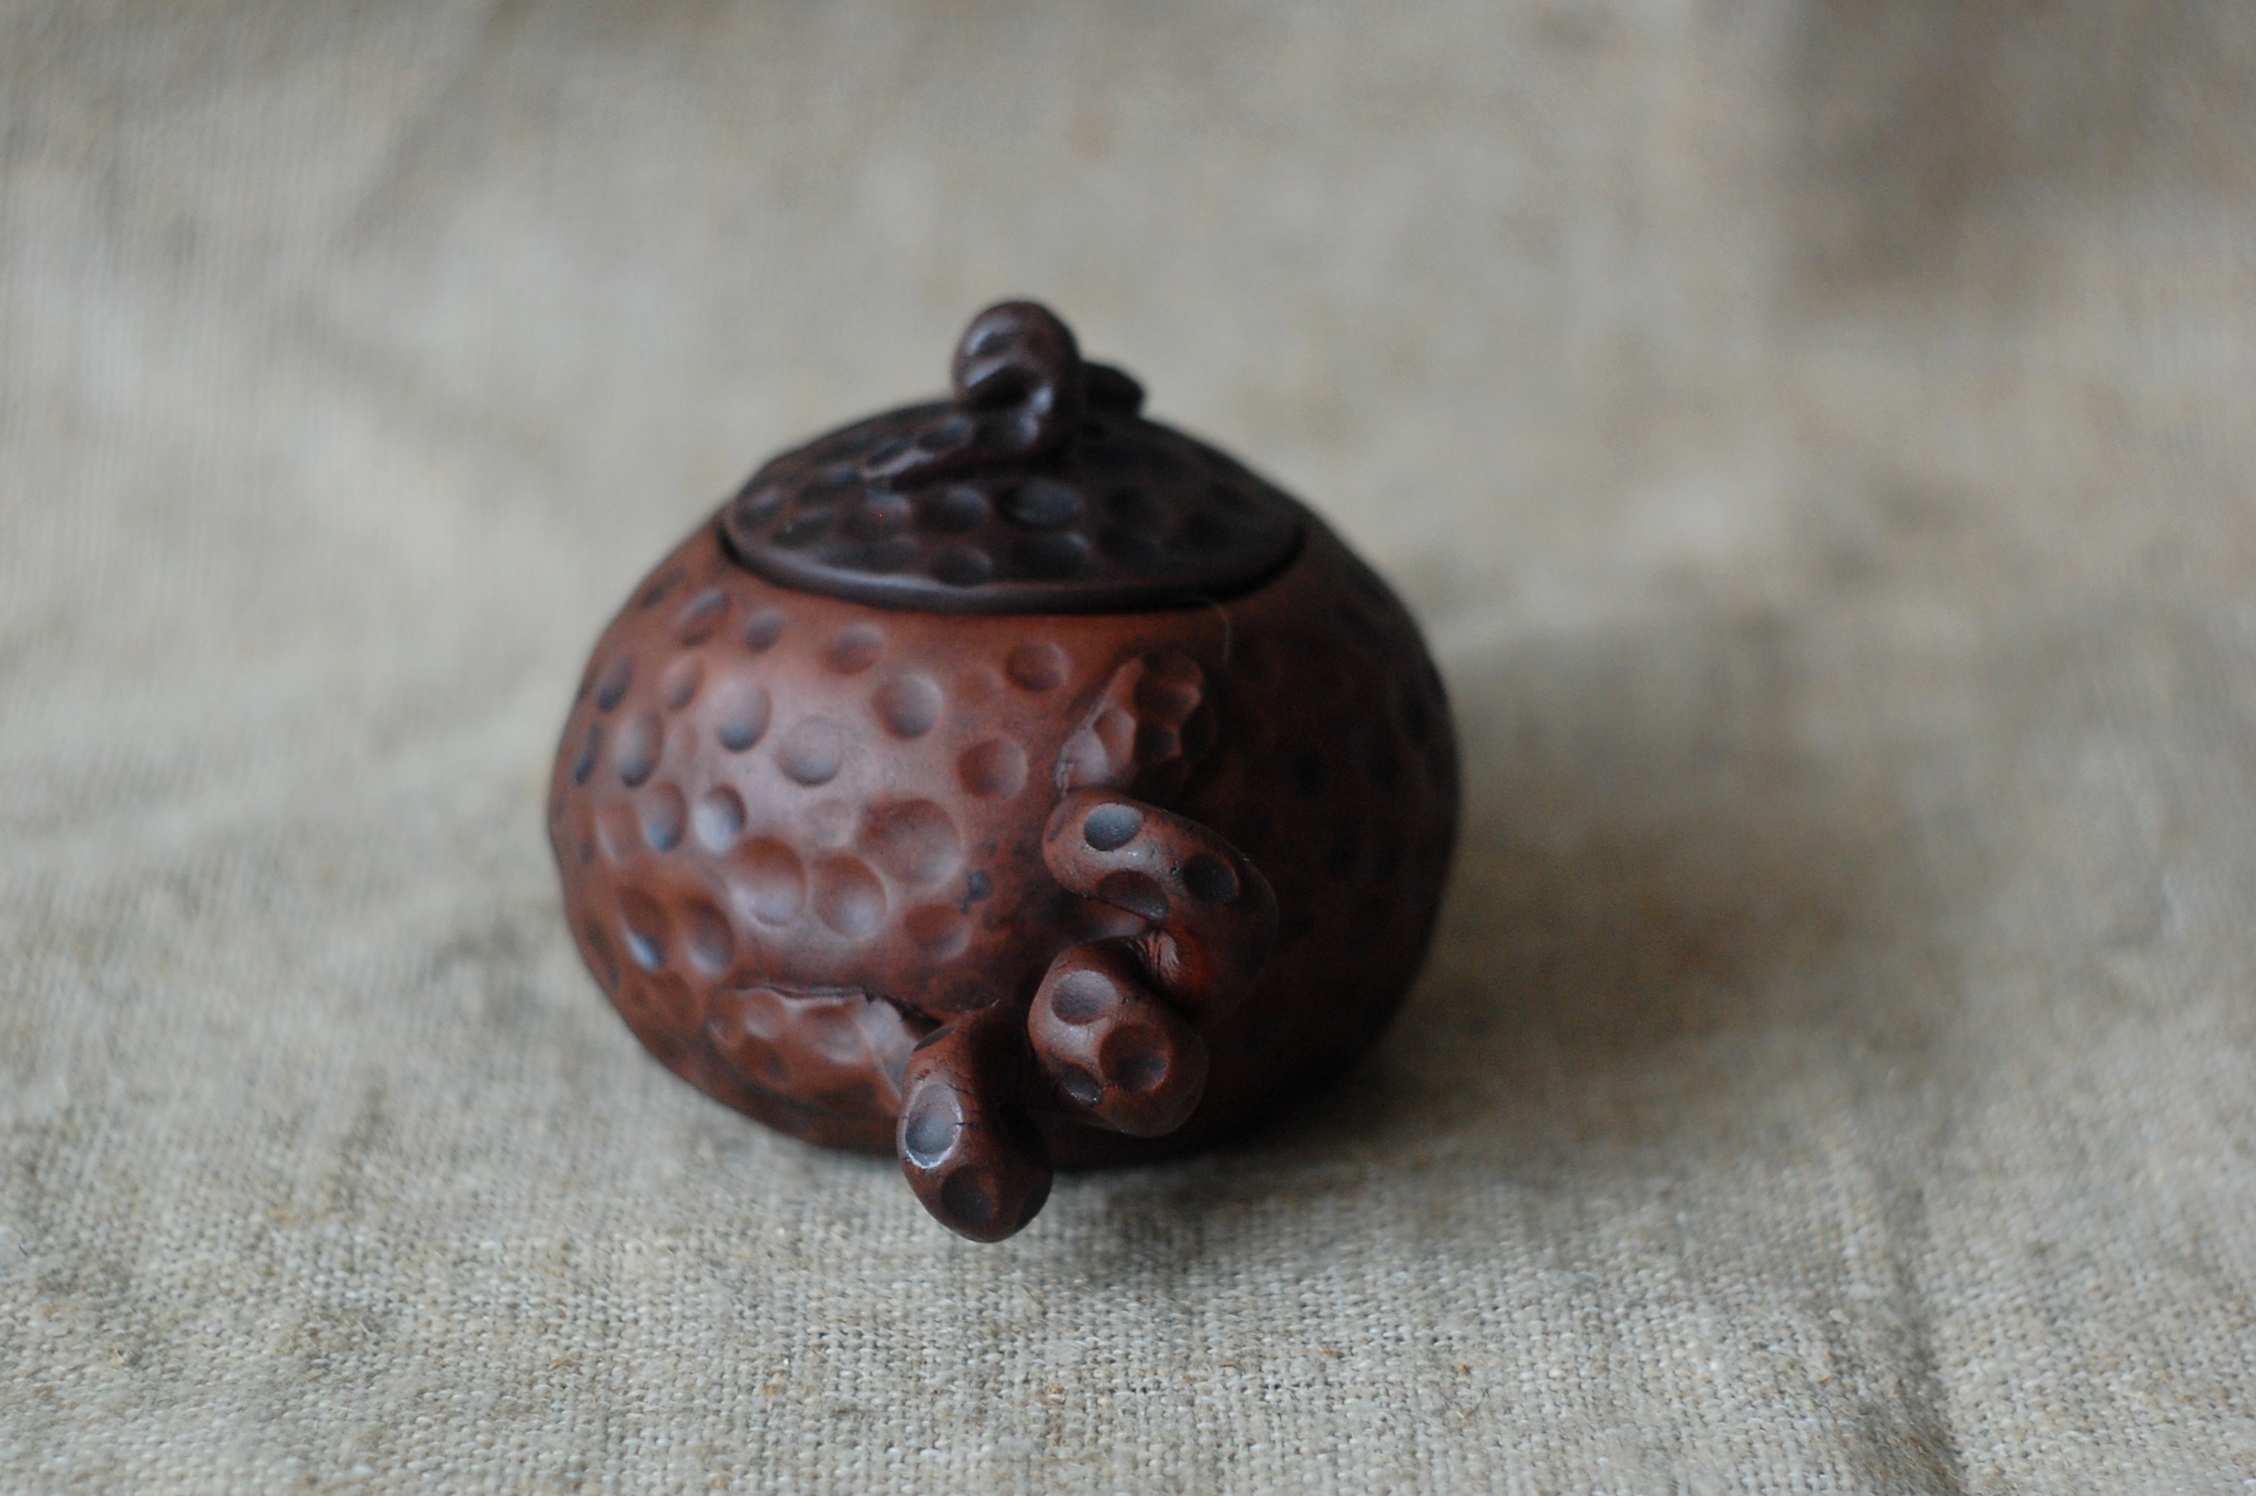 Bug pottery clay tea brewing pot or teapot for tea ceremony